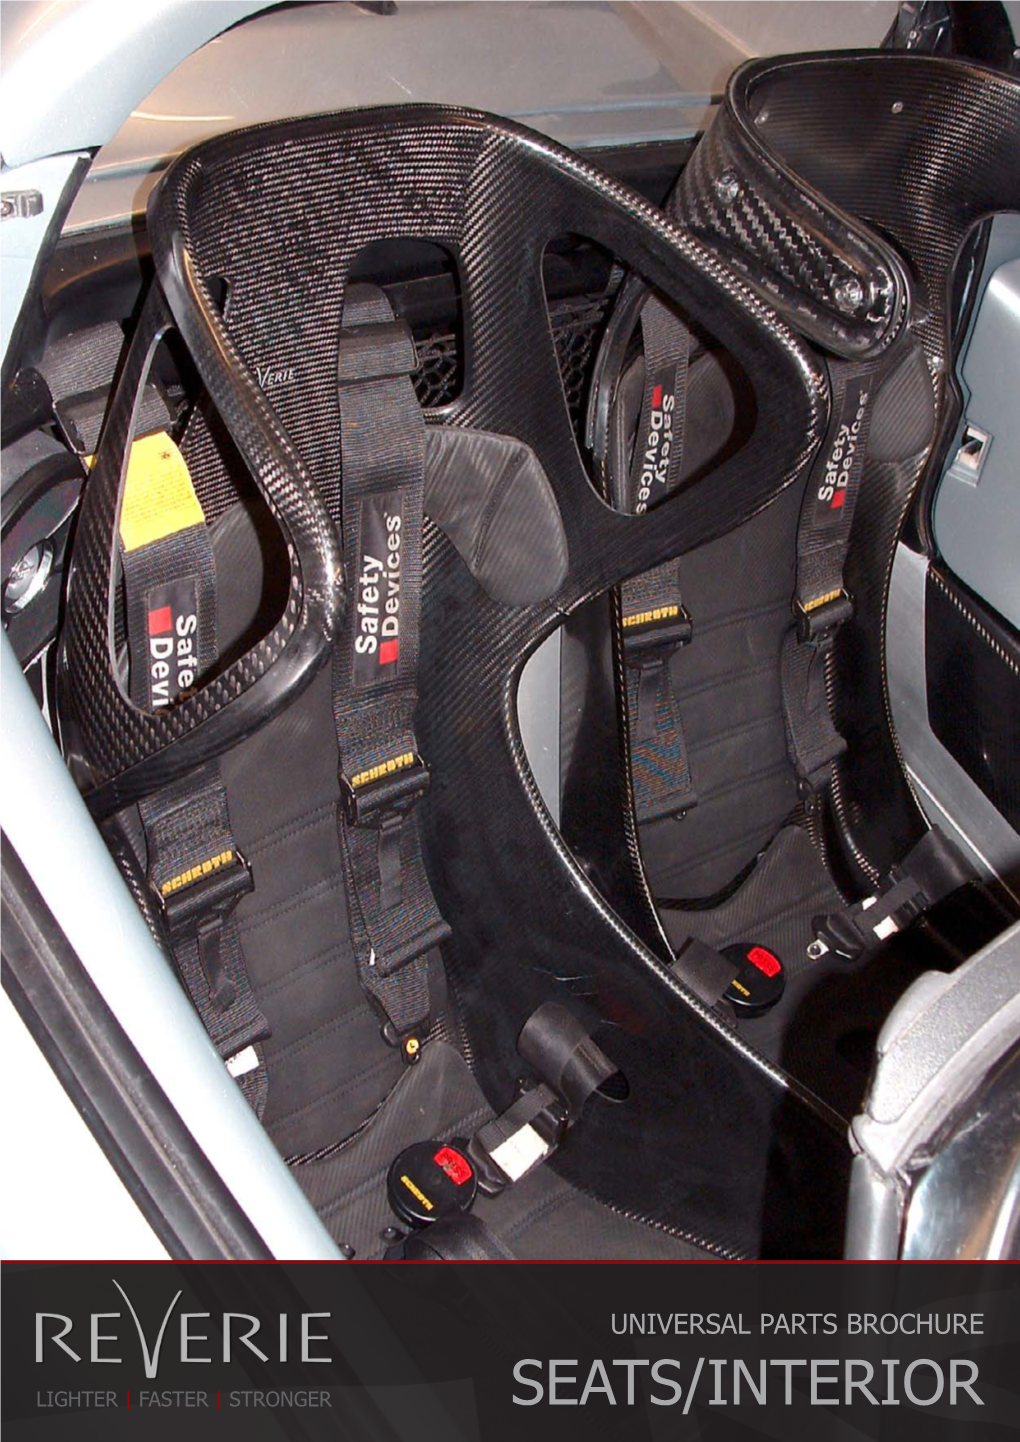 SEATS/INTERIOR1 LIGHTER | FASTER | STRONGER ABOUT US MD, Simon J